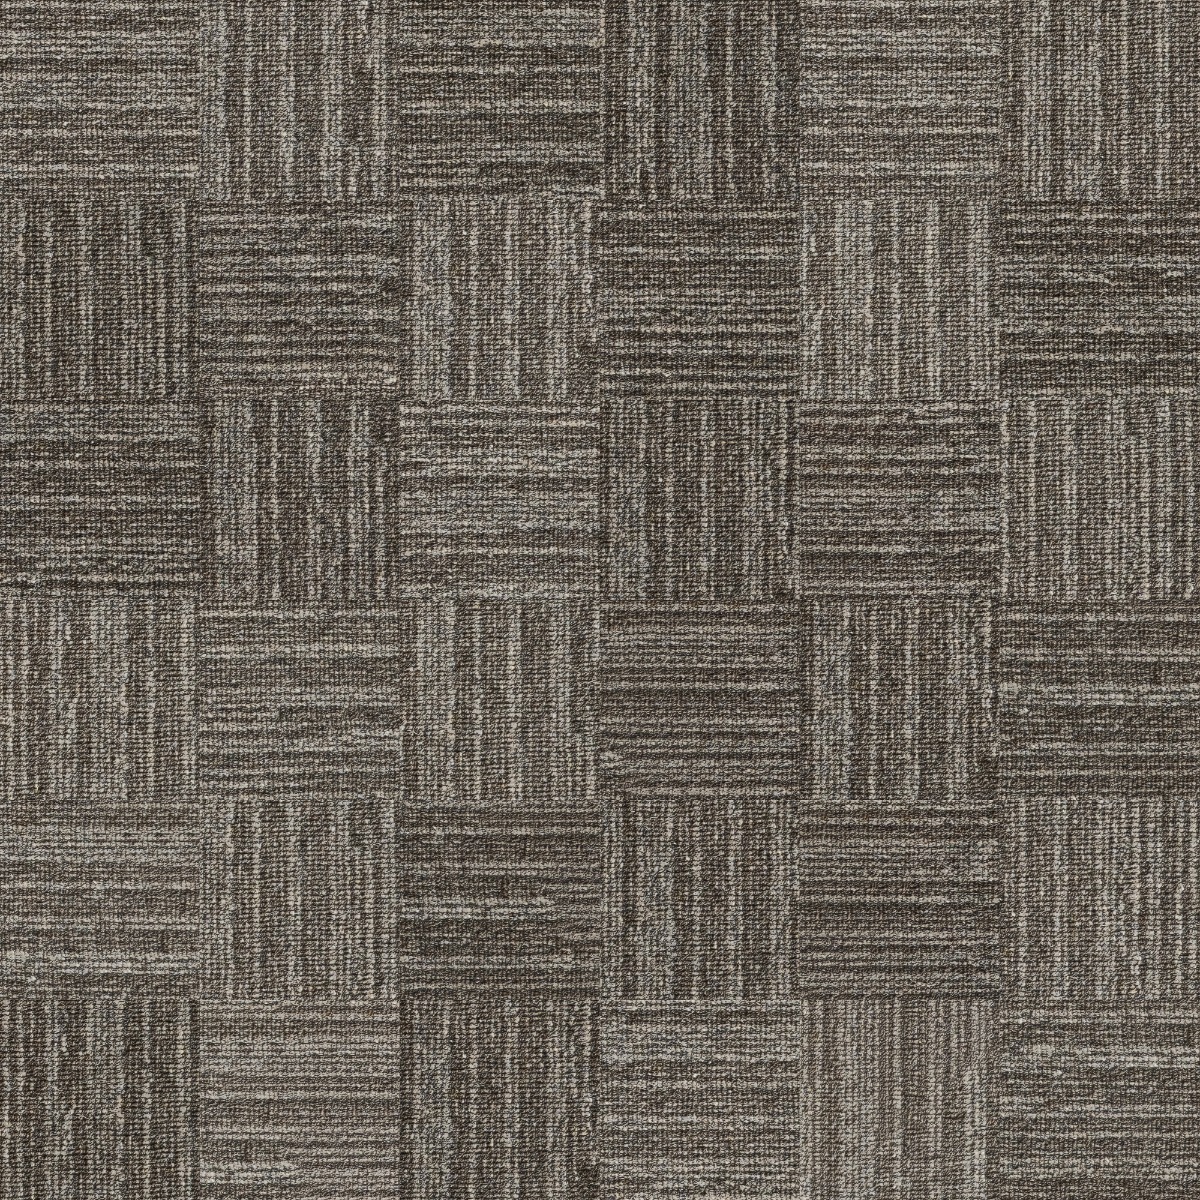 A seamless carpet texture with earth tone barcode carpet units arranged in a Stack pattern